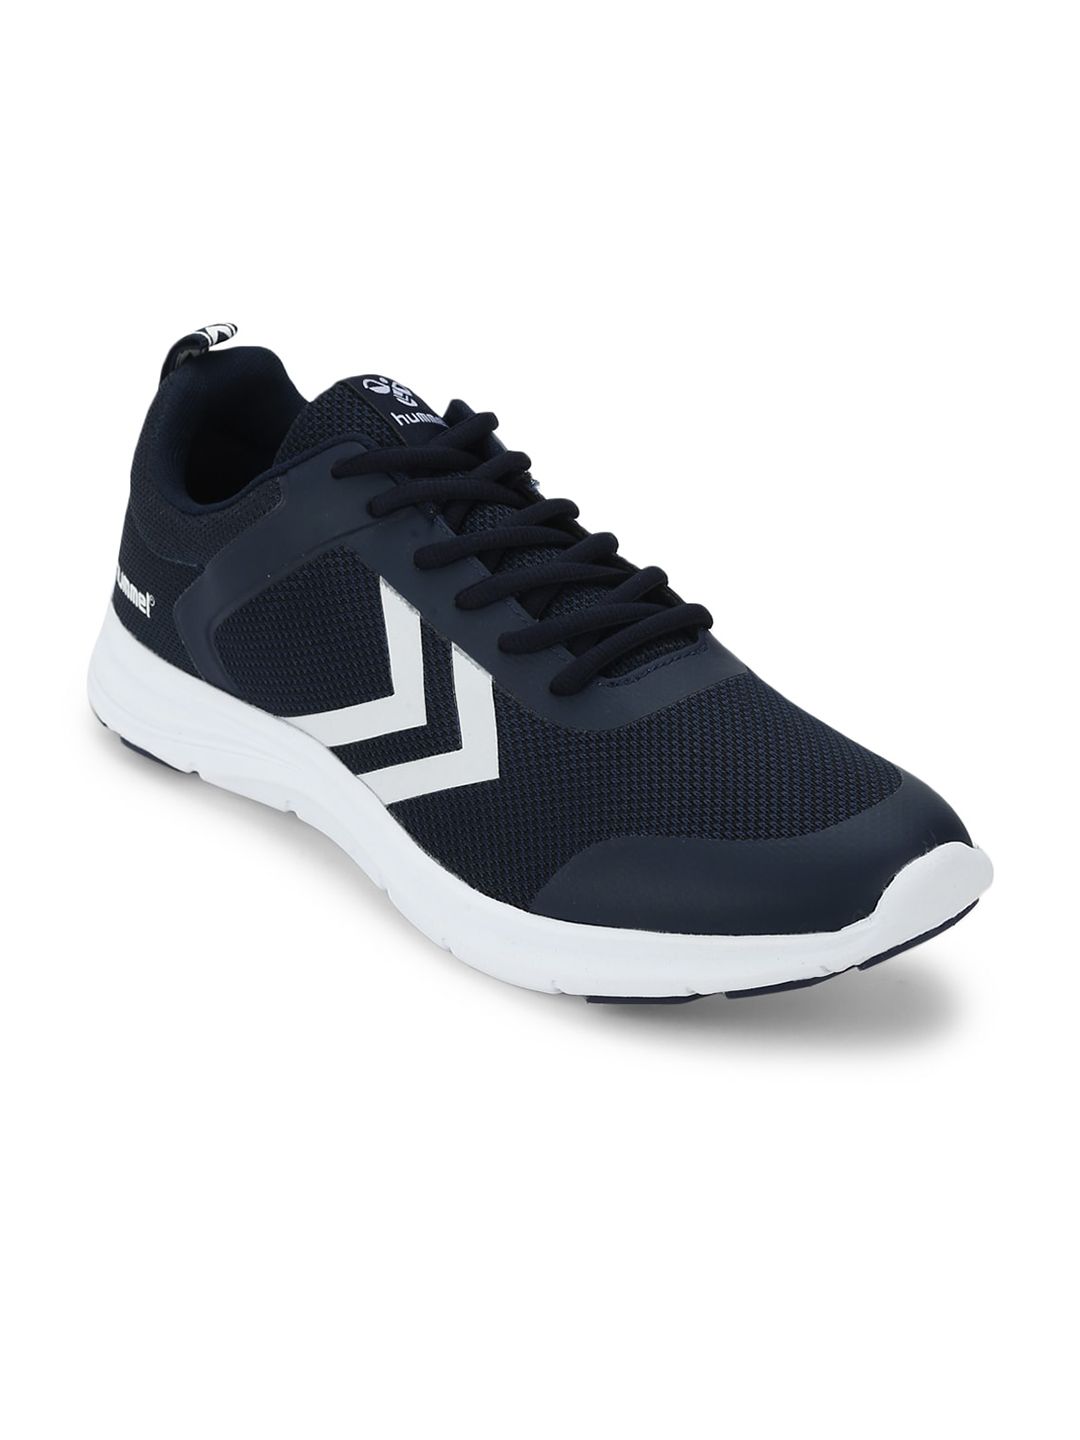 hummel Unisex Navy Blue Mesh Training or Gym Non-Marking Shoes Price in India